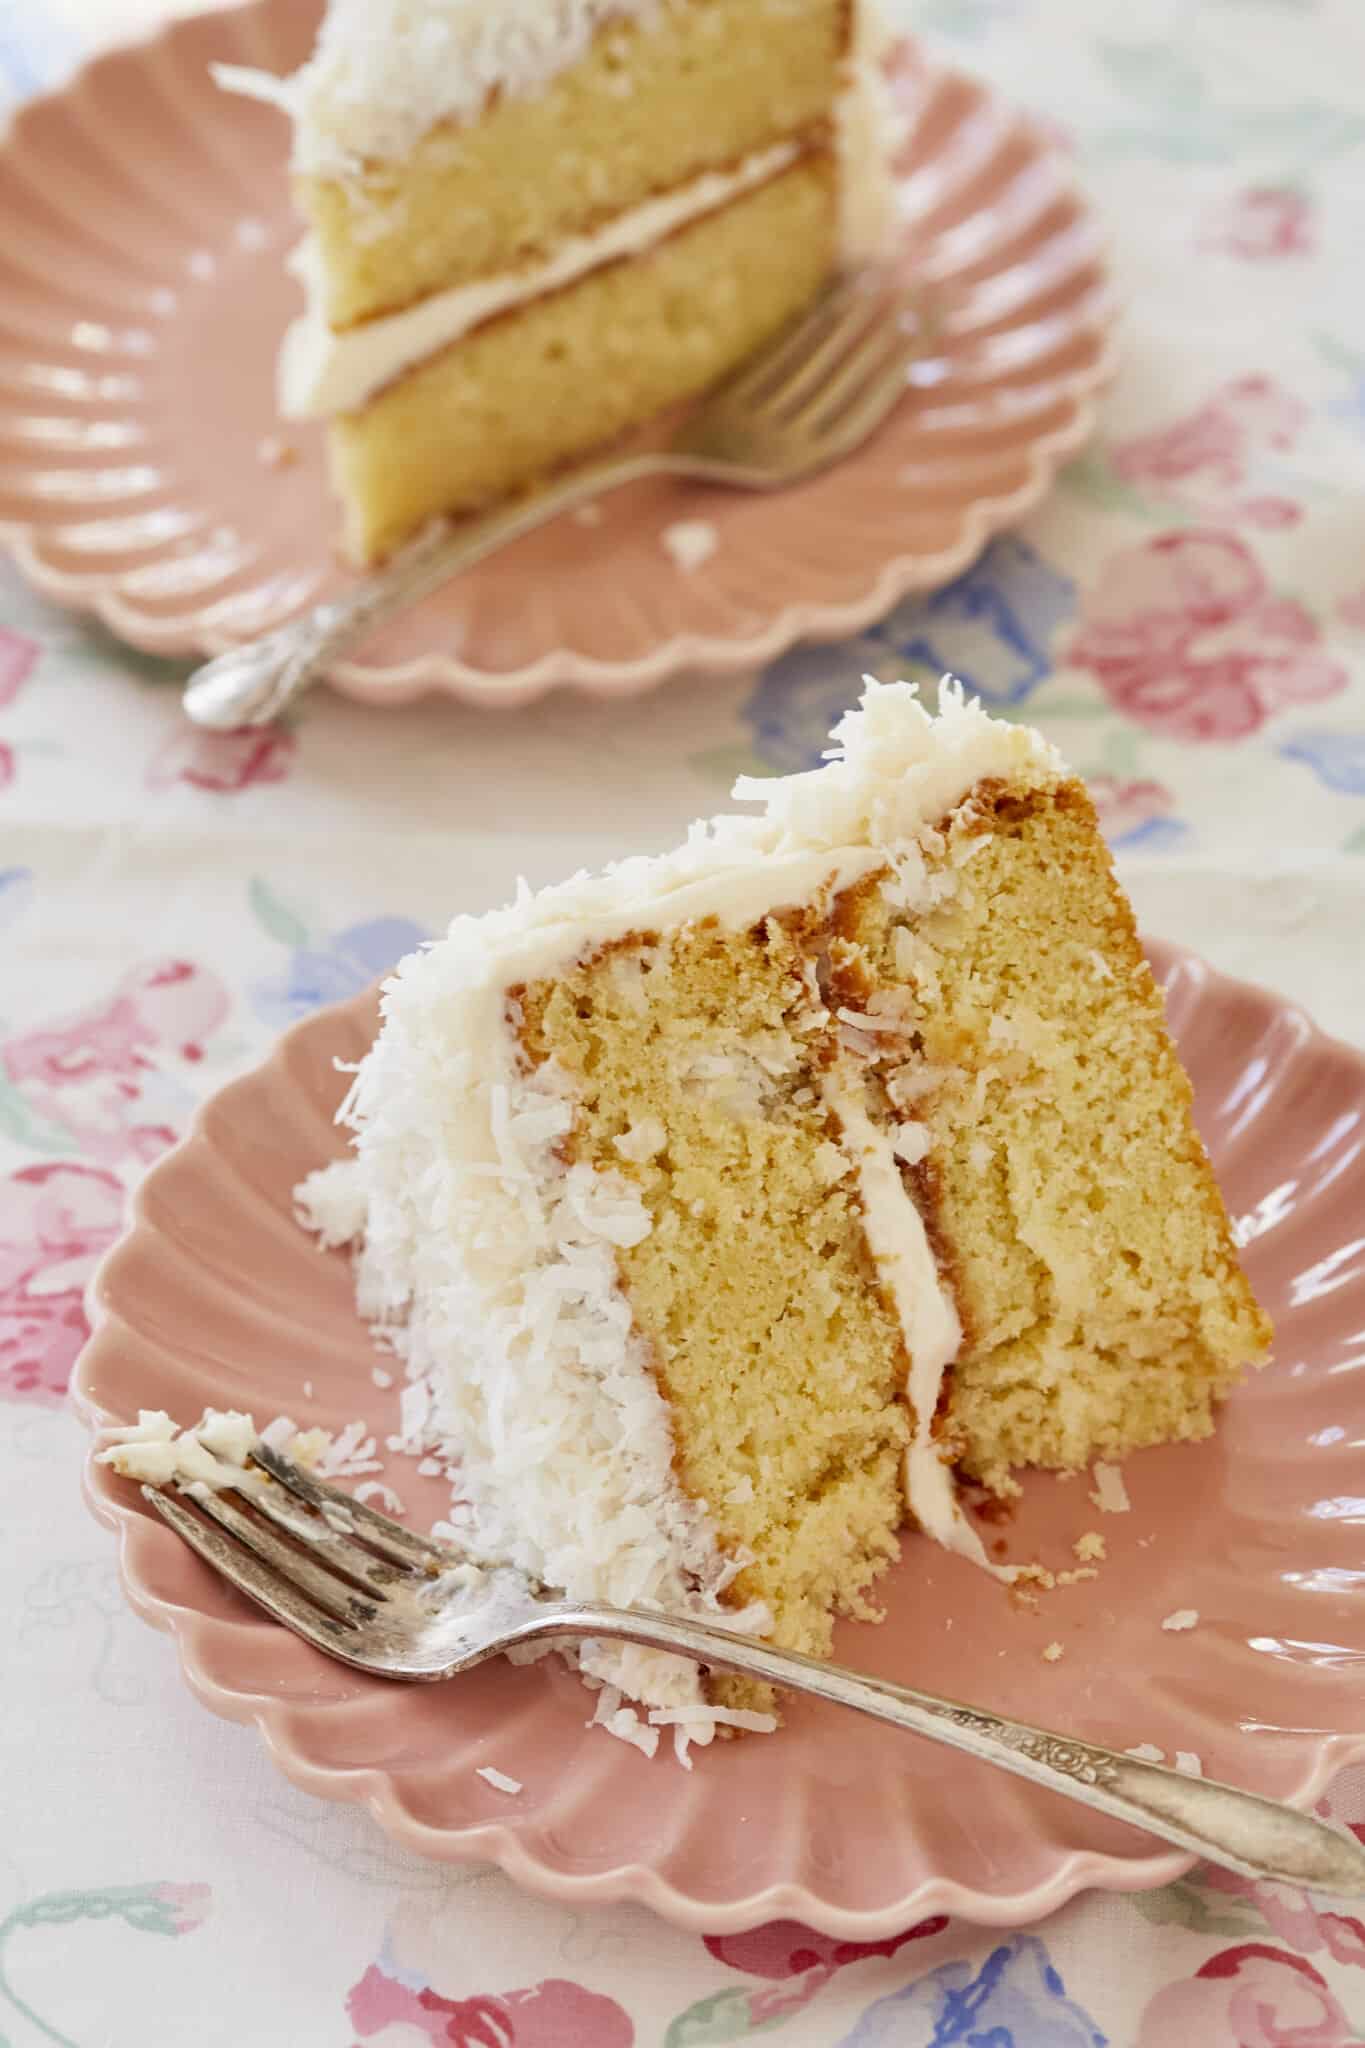 Two slices are served with fork on the plates, showing very moist and soft crumb, smooth frosting and crunchy flakes. . 